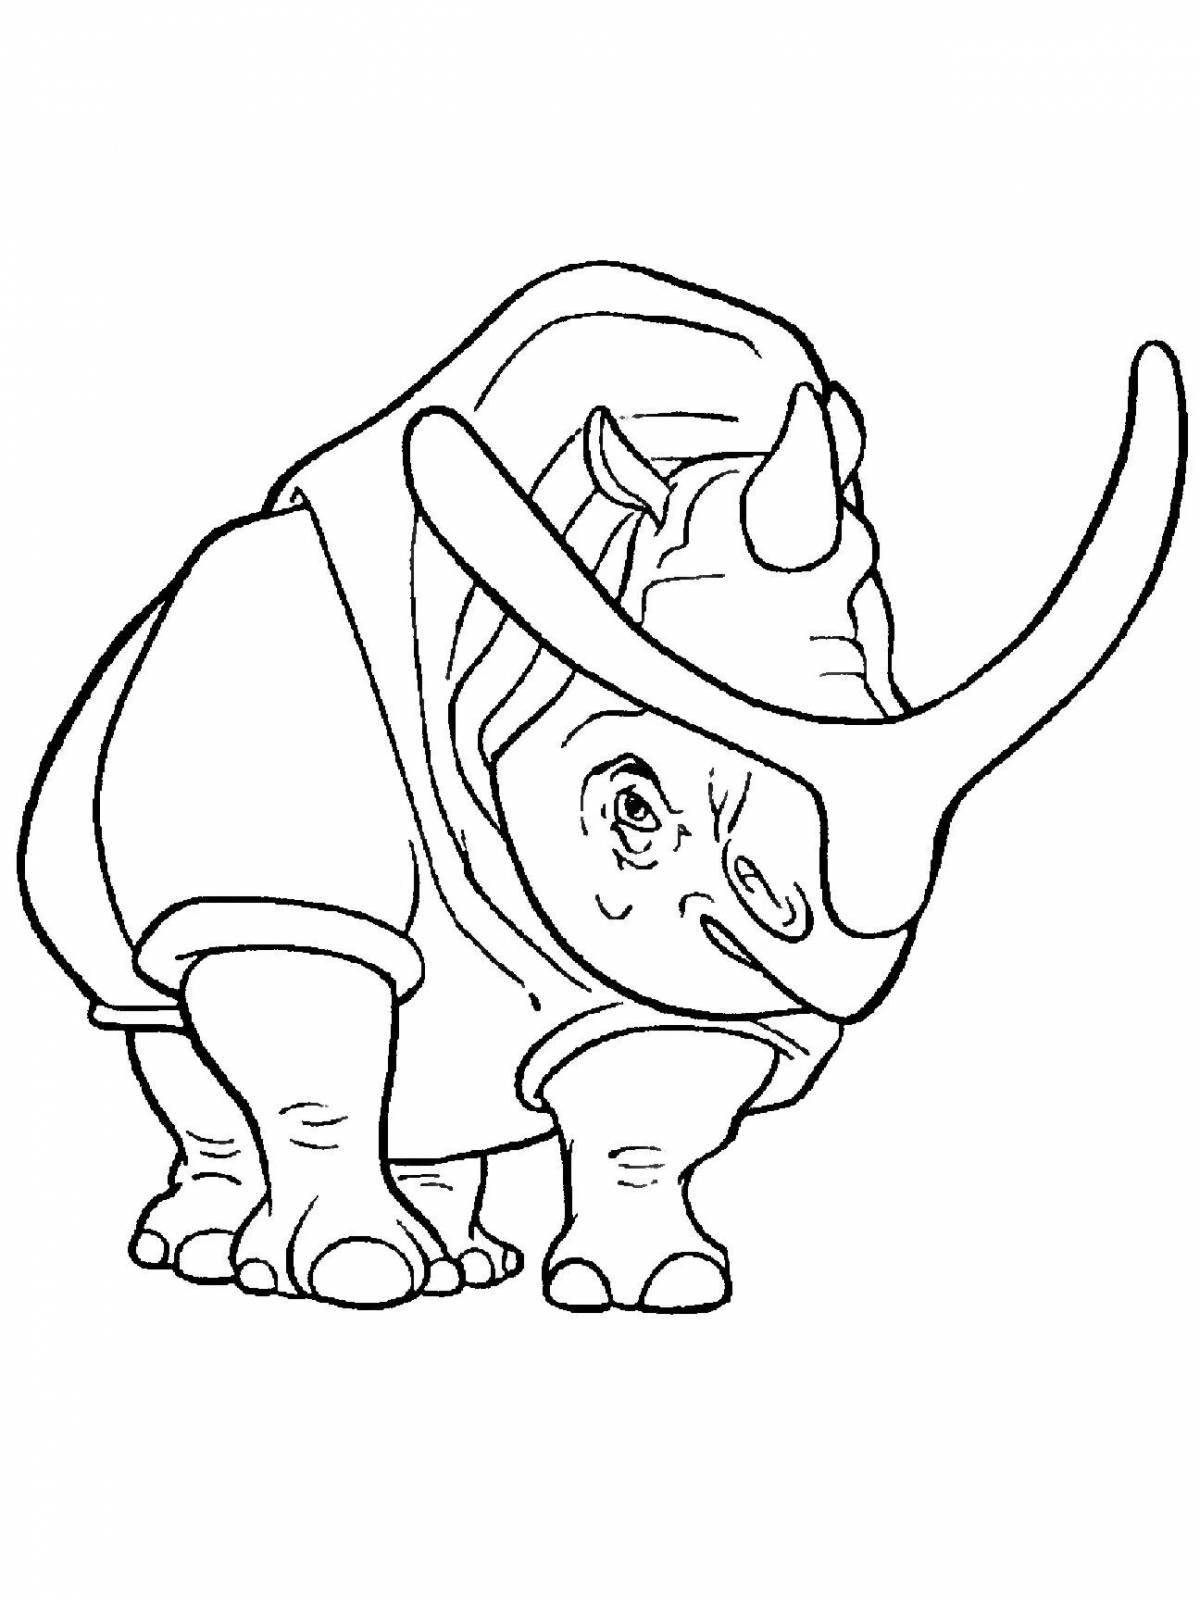 Diego ice age amazing coloring page